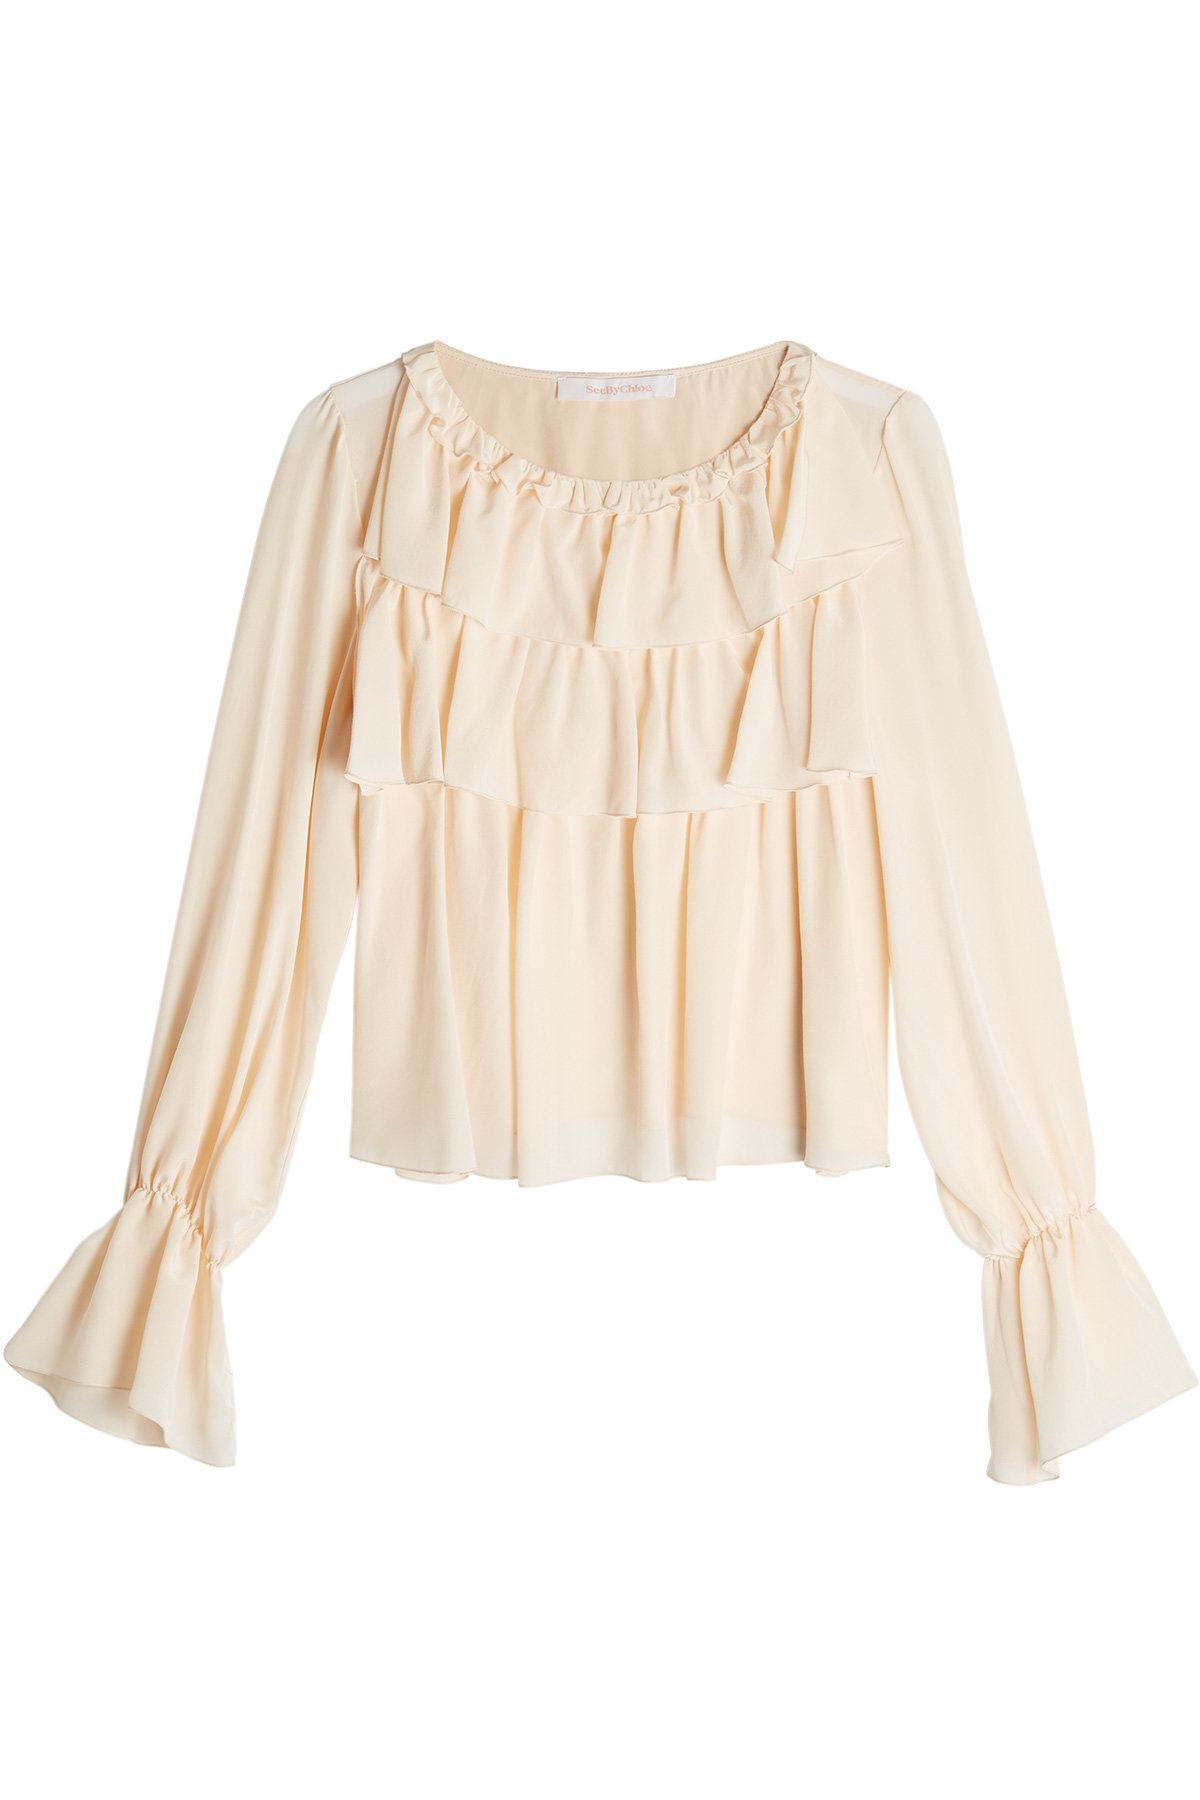 See by Chloe - Silk Blouse with Flutter Details